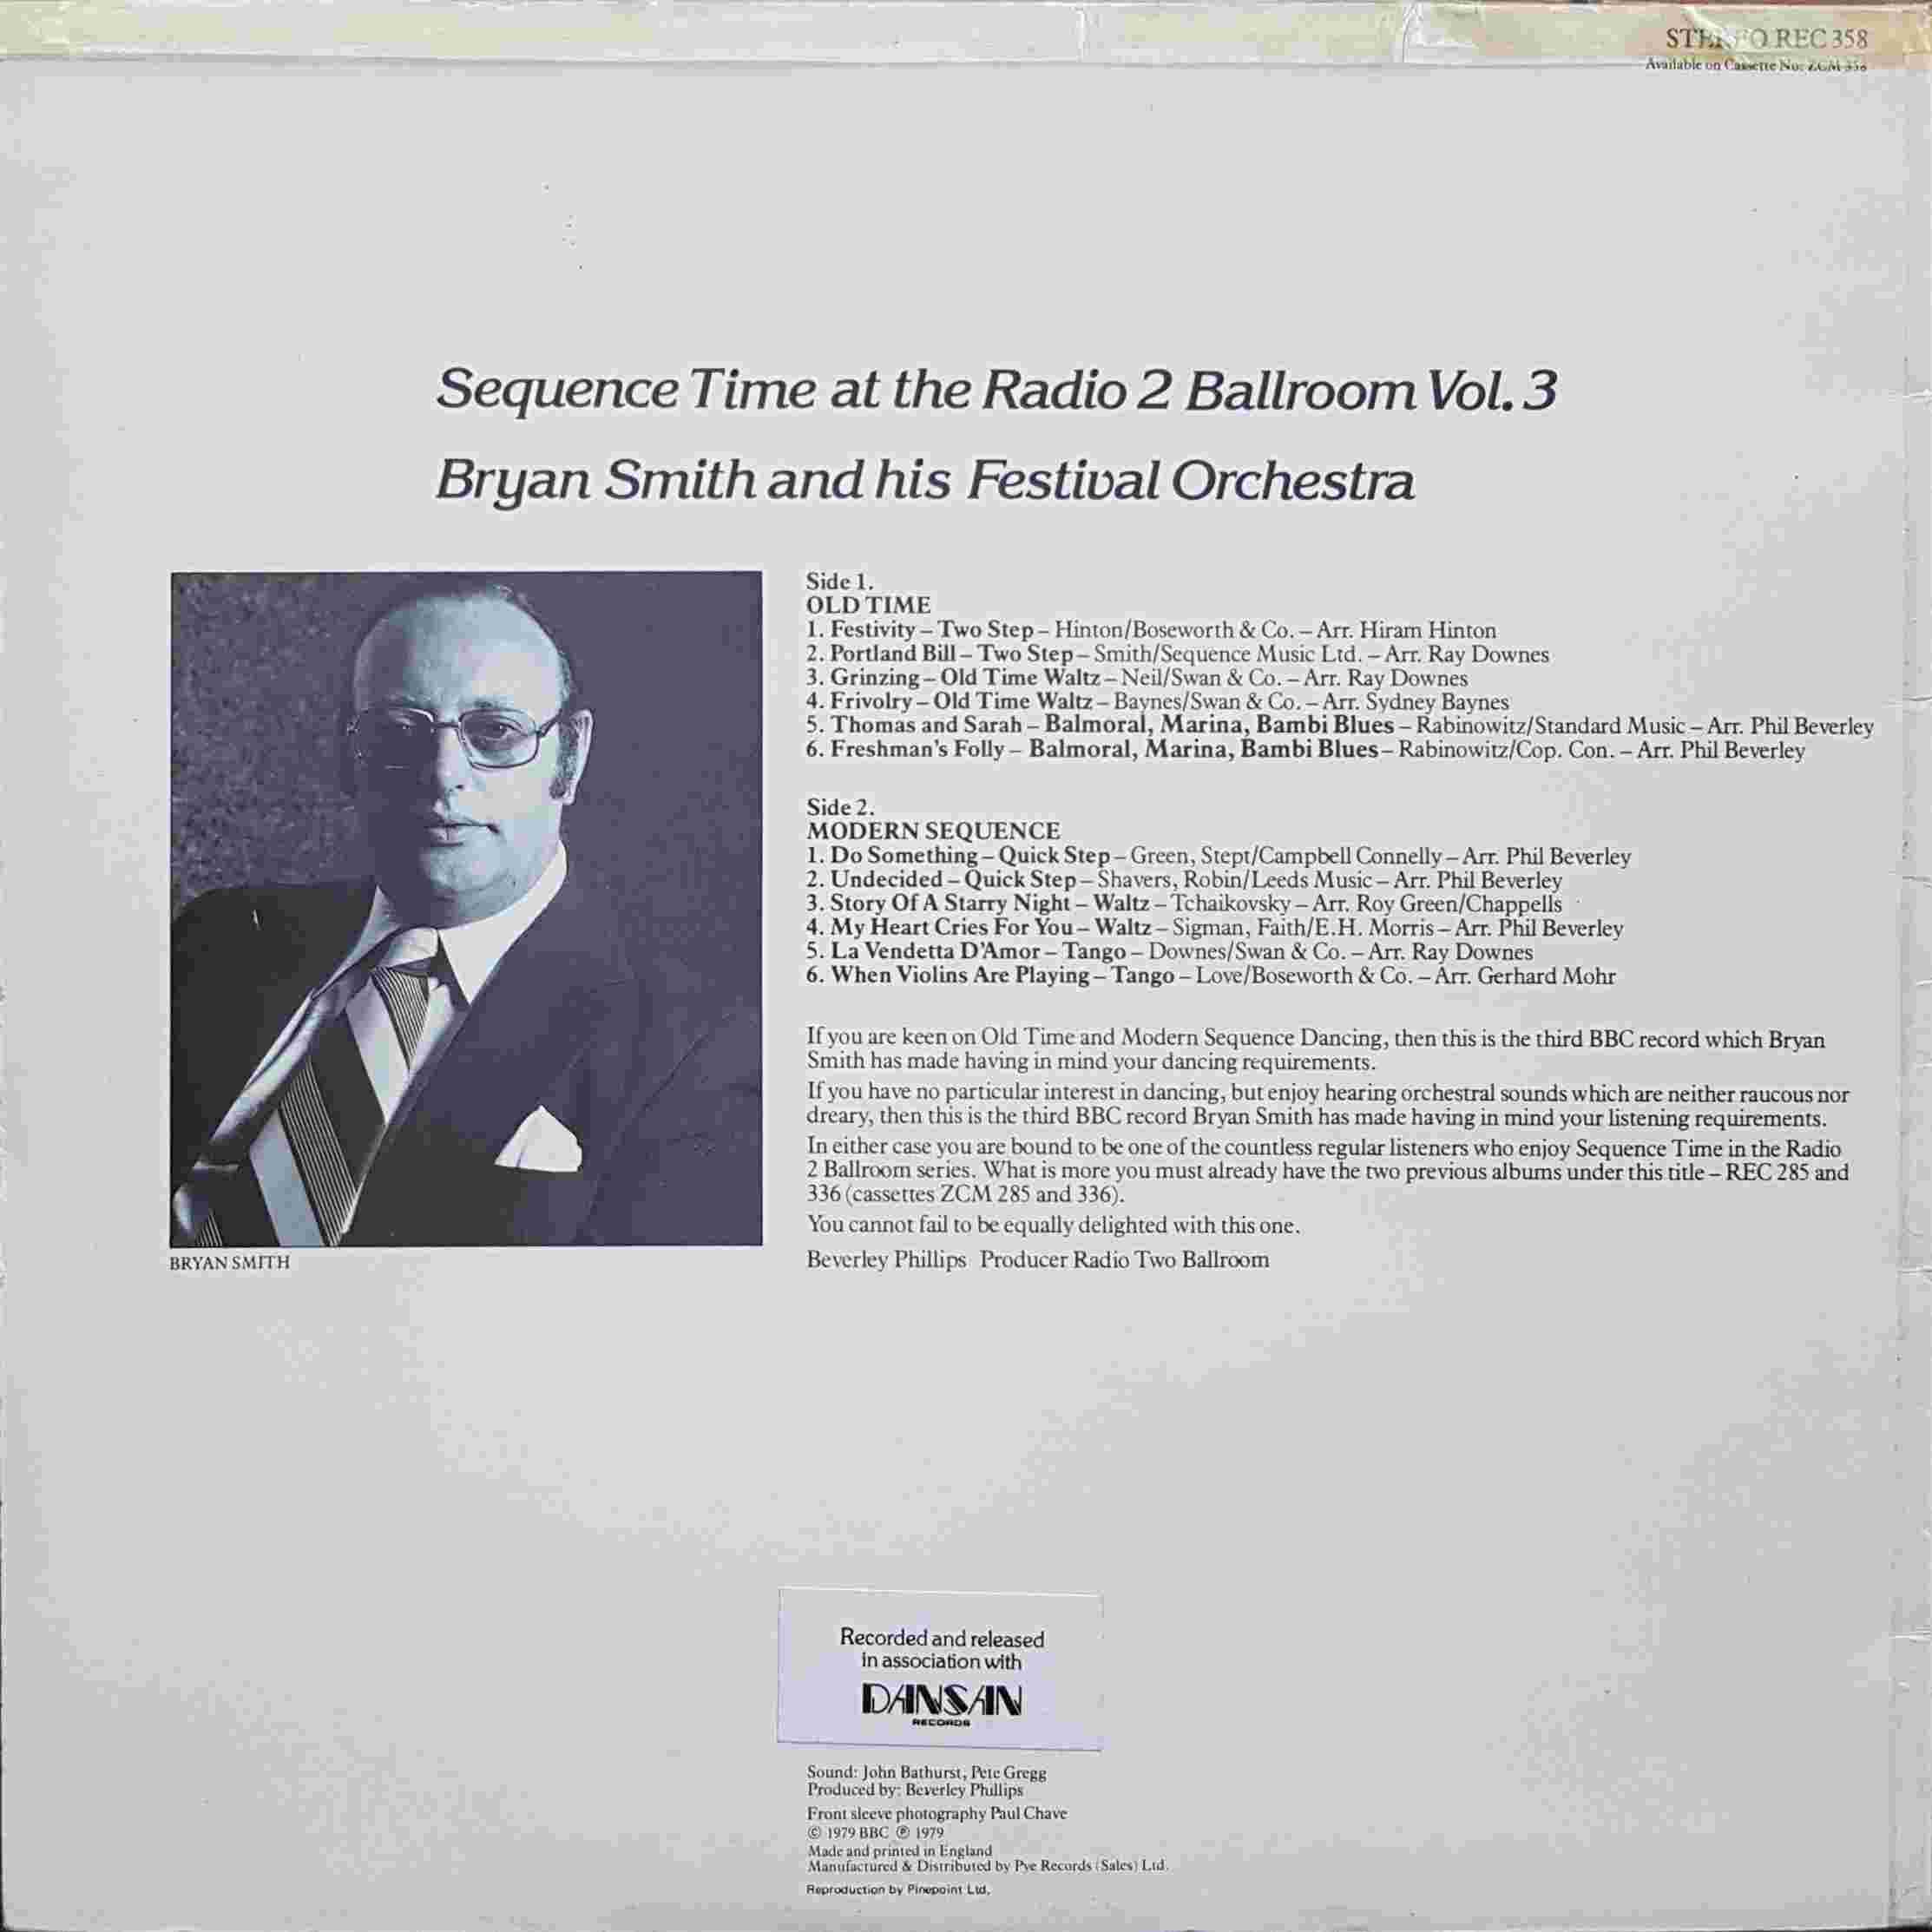 Picture of REC 358 Sequence time at the Radio 2 ballroom - Volume 3 by artist Various from the BBC records and Tapes library